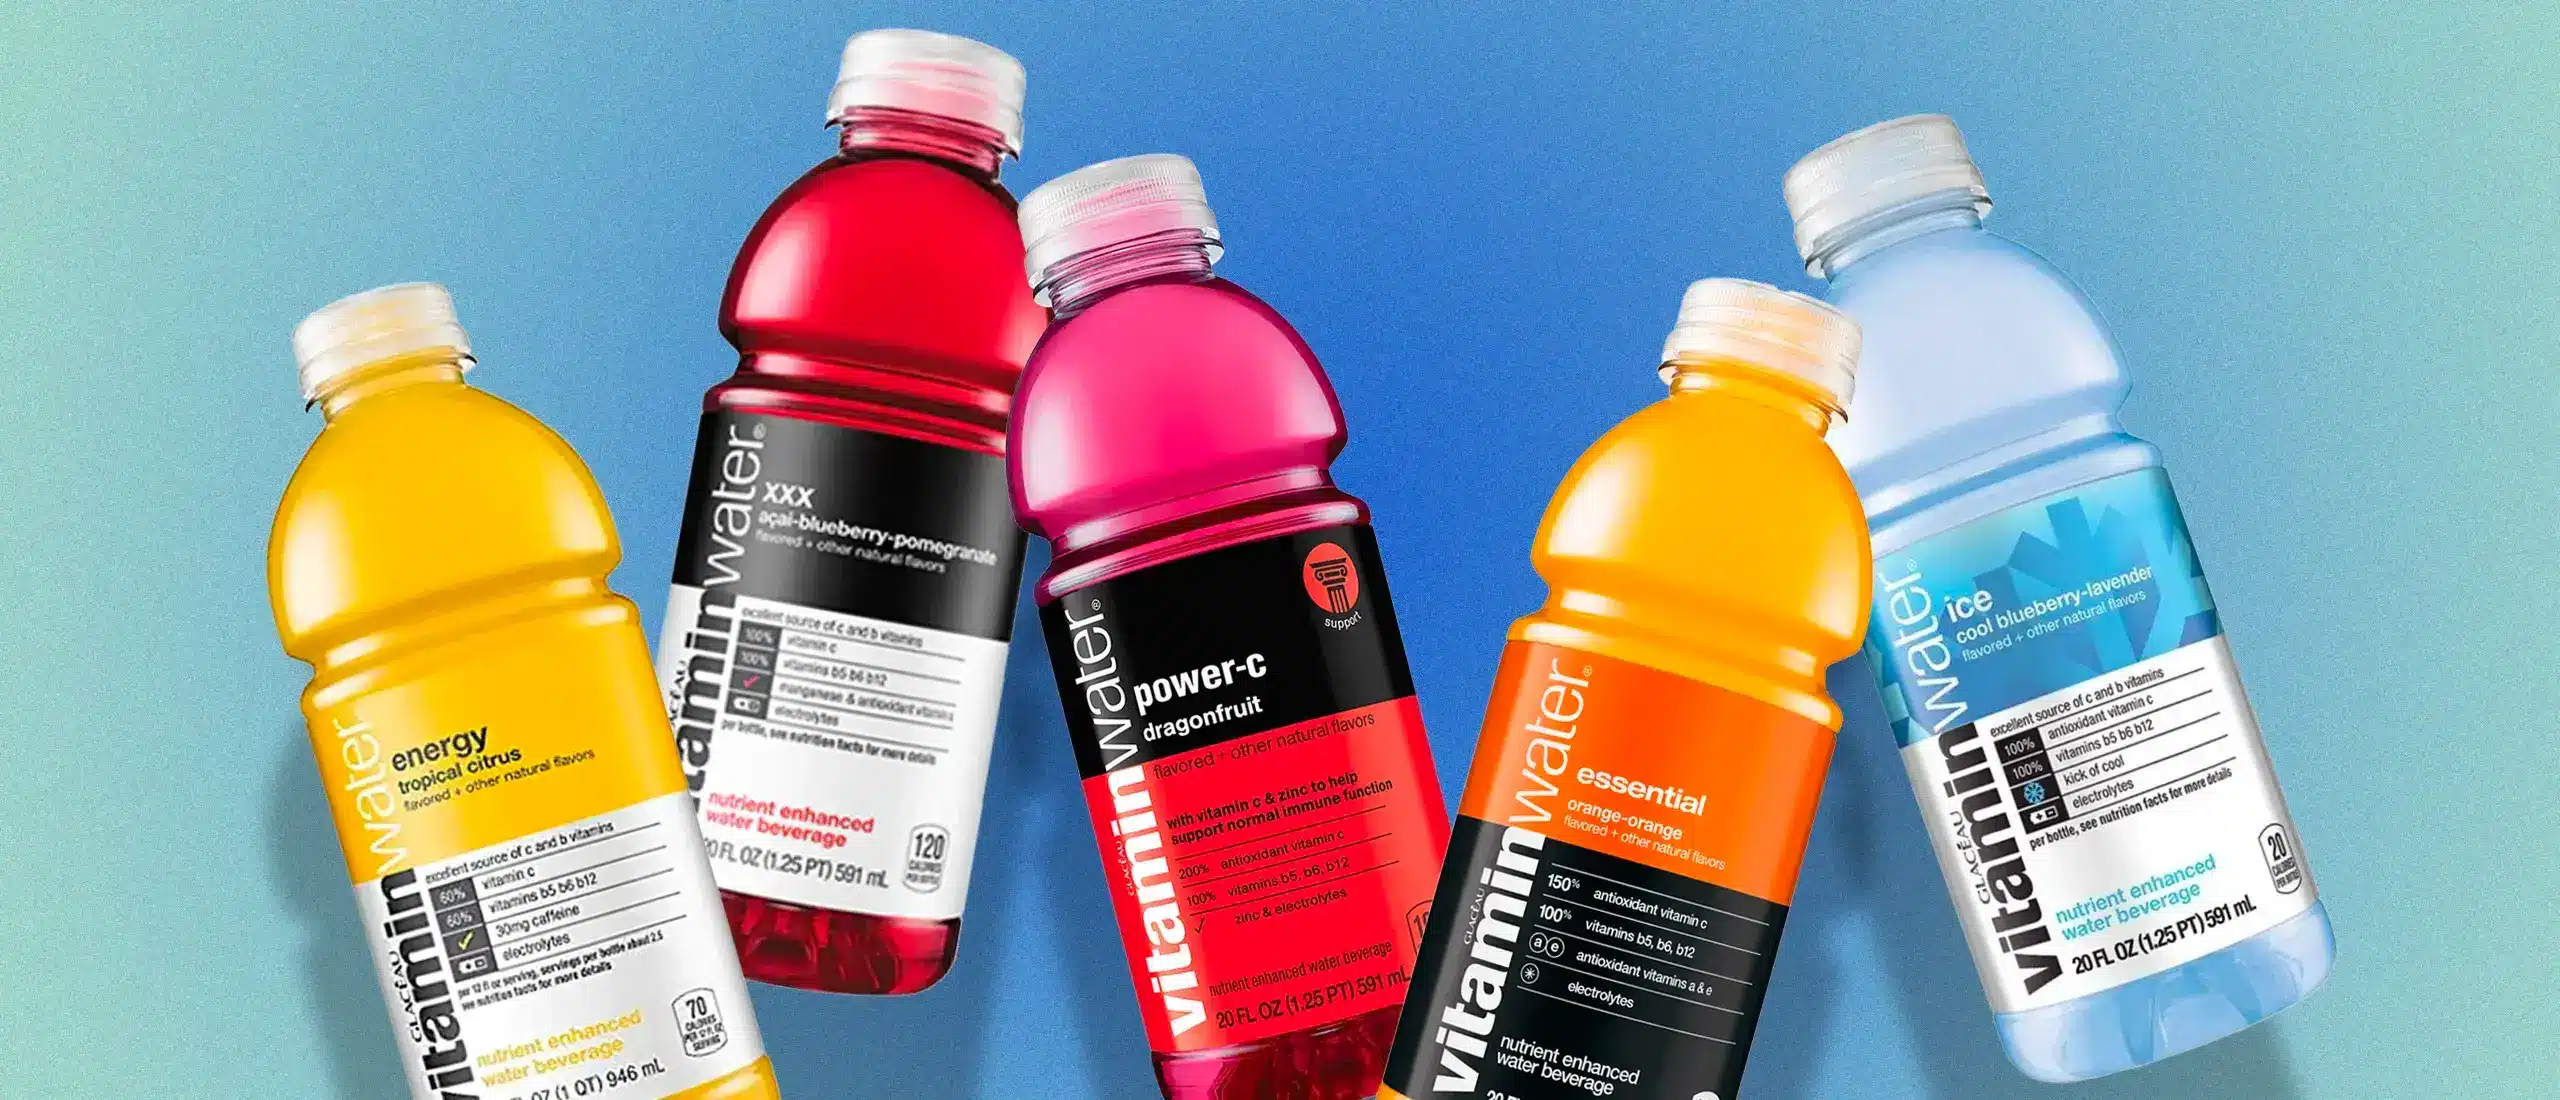 Is vitamin water good for you